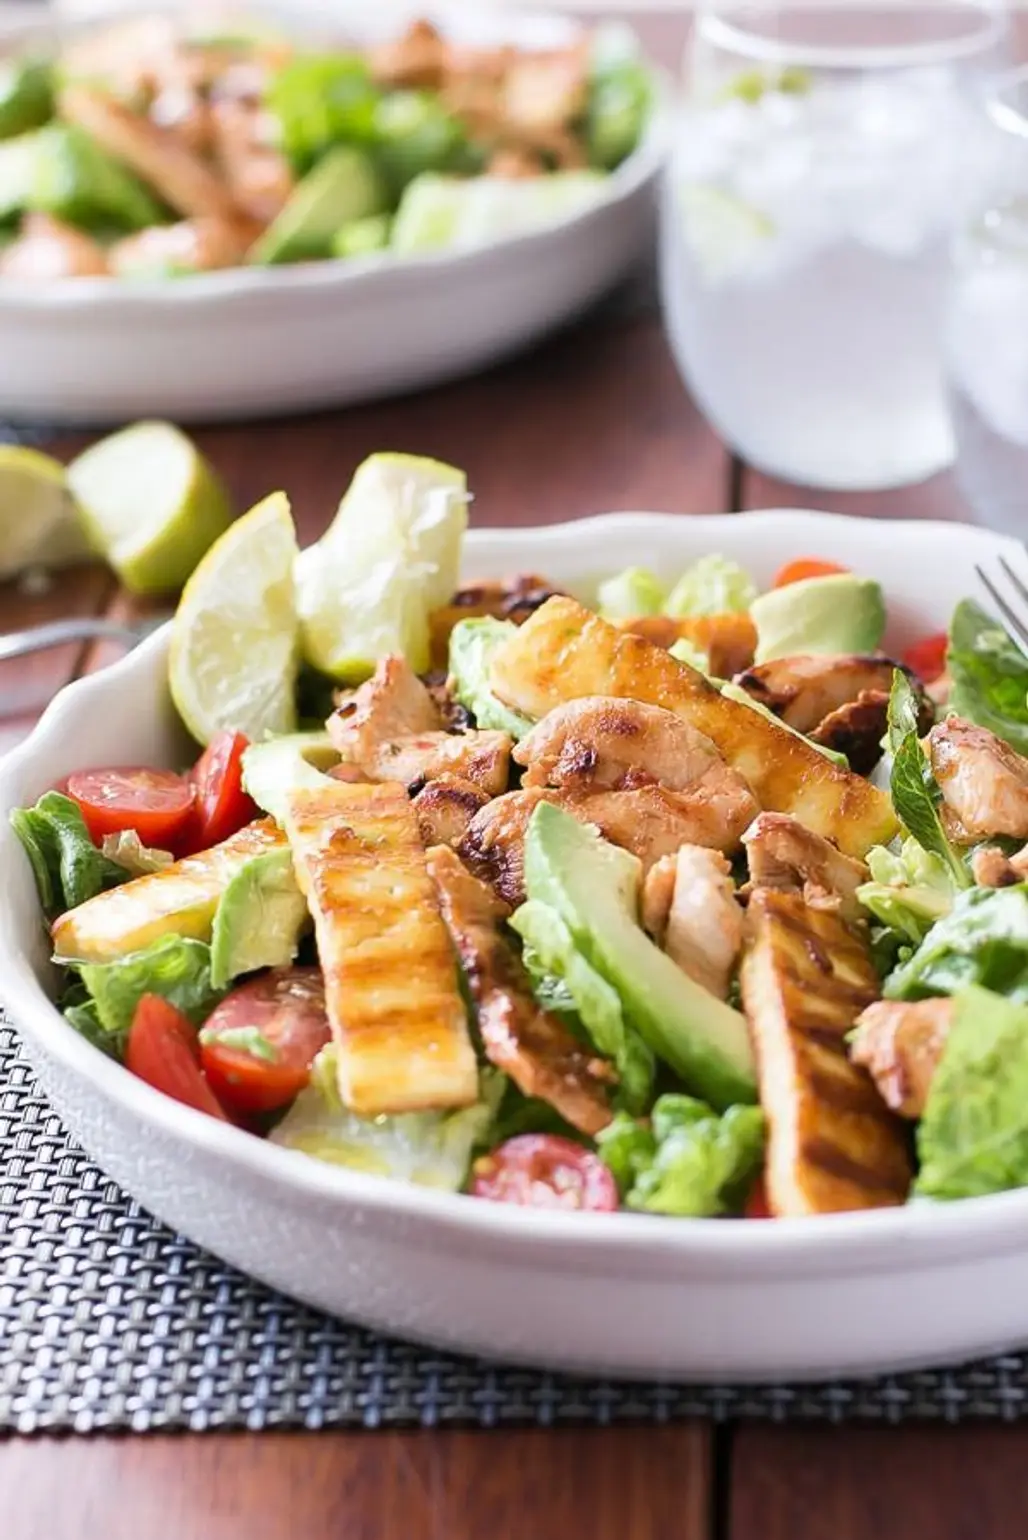 Sweet Chili Chicken, Haloumi and Avocado Salad with Lime Dressing